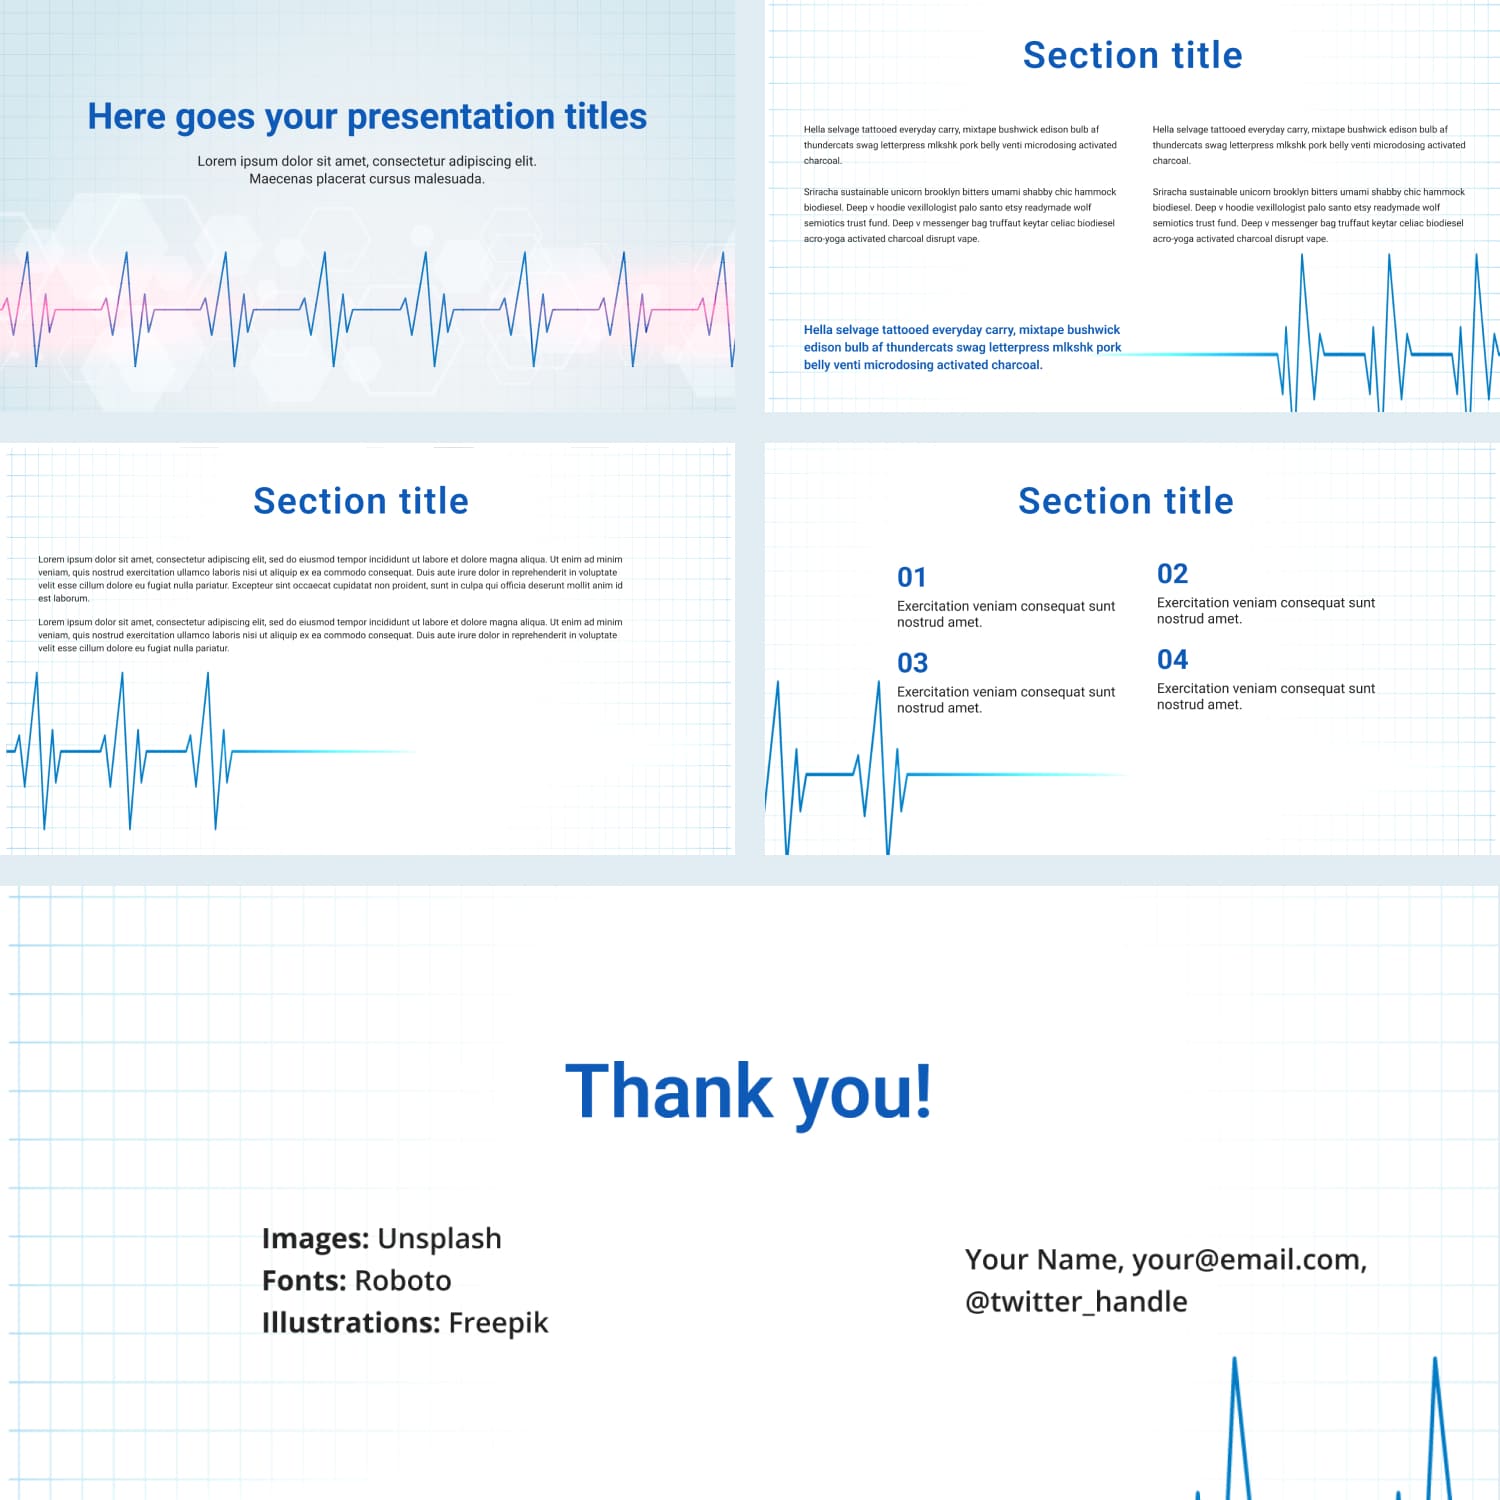 Preview Medical Template For Powerpoint.